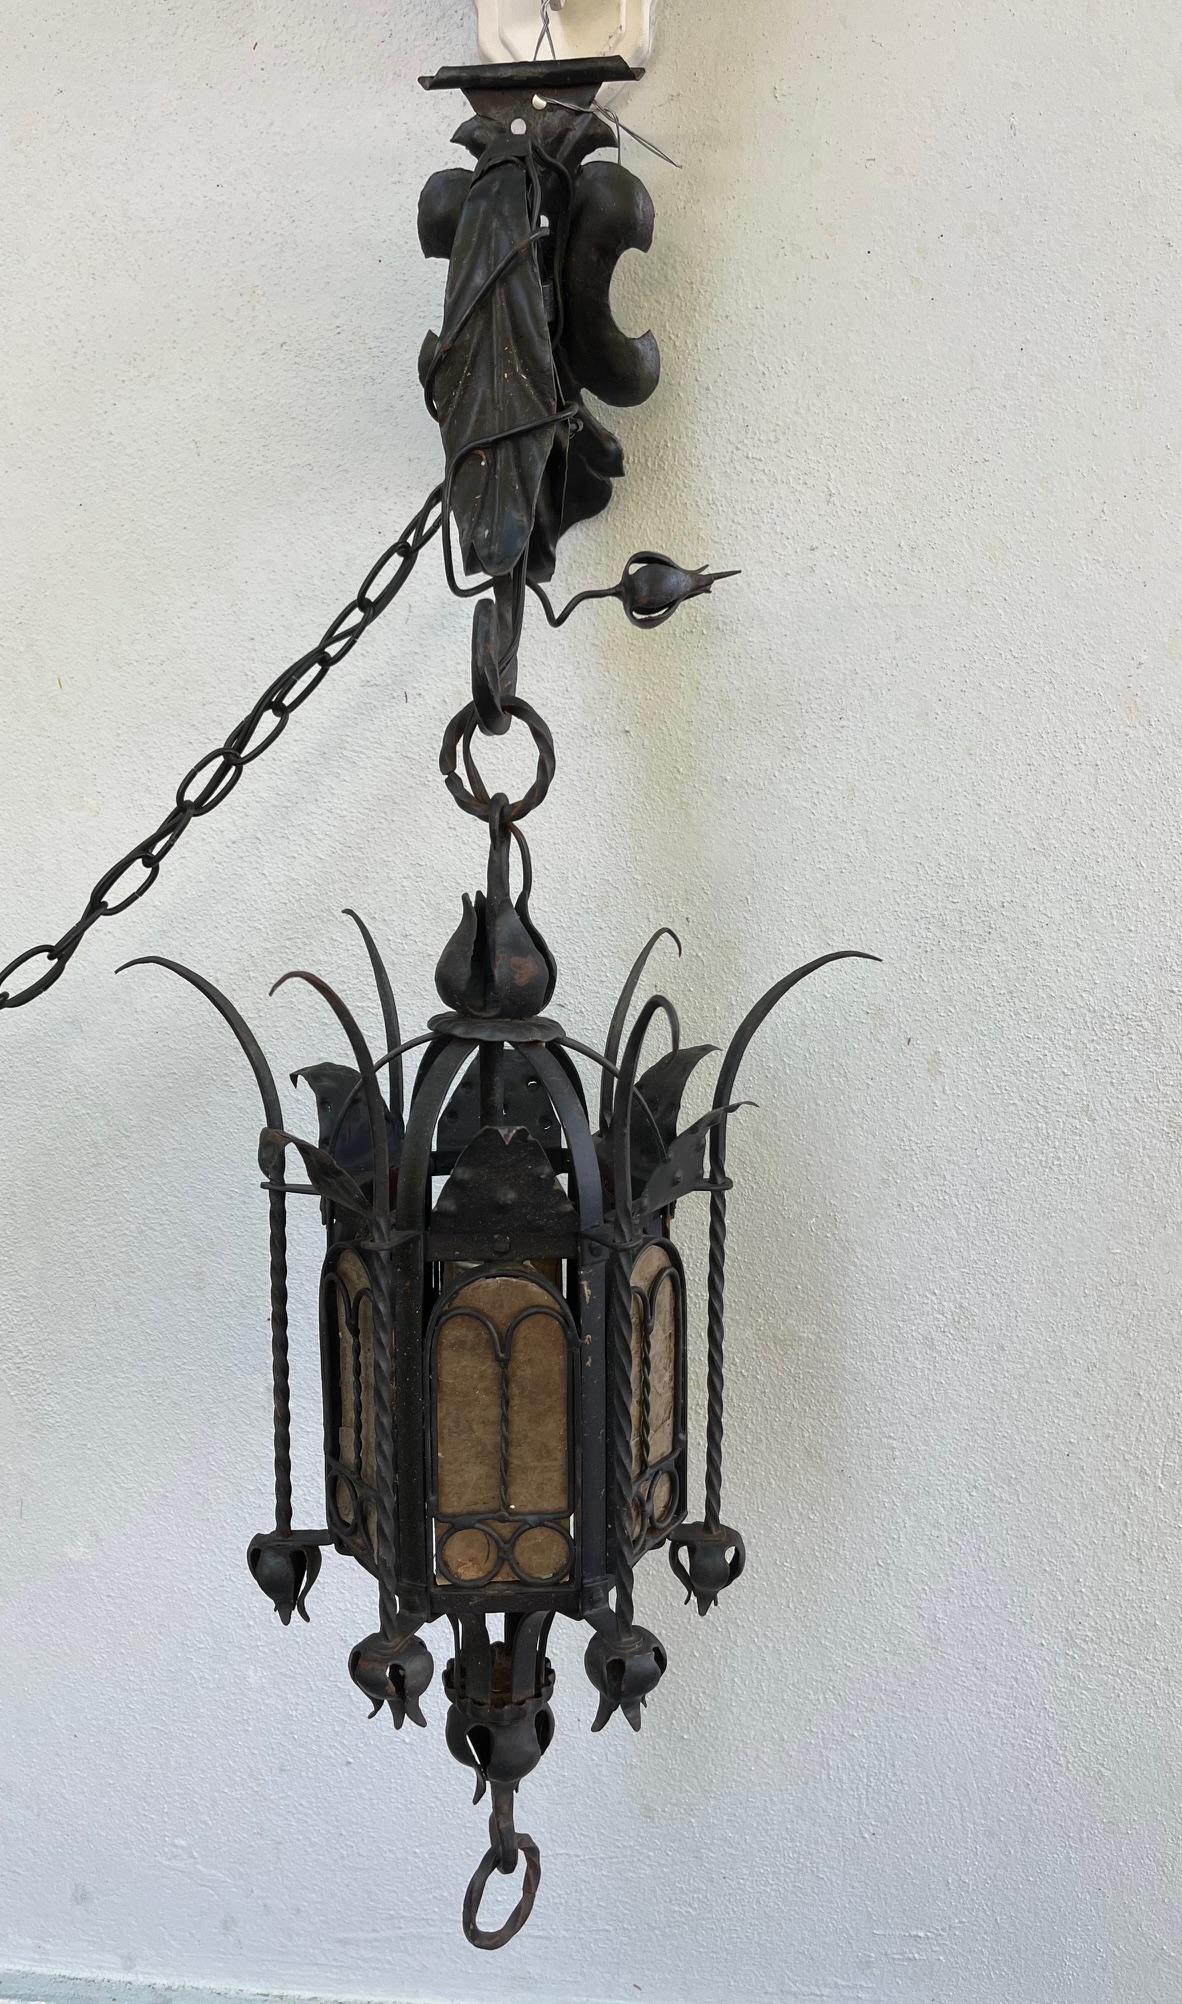 19th Century Spanish Gothic Style Wrought Iron Portico Lantern.

Antique hand forged iron Gothic style hanging lantern from Spain circa 1890. It is embellished with cut iron elements, spires and ring pull. The lantern comes with a decorative hanging